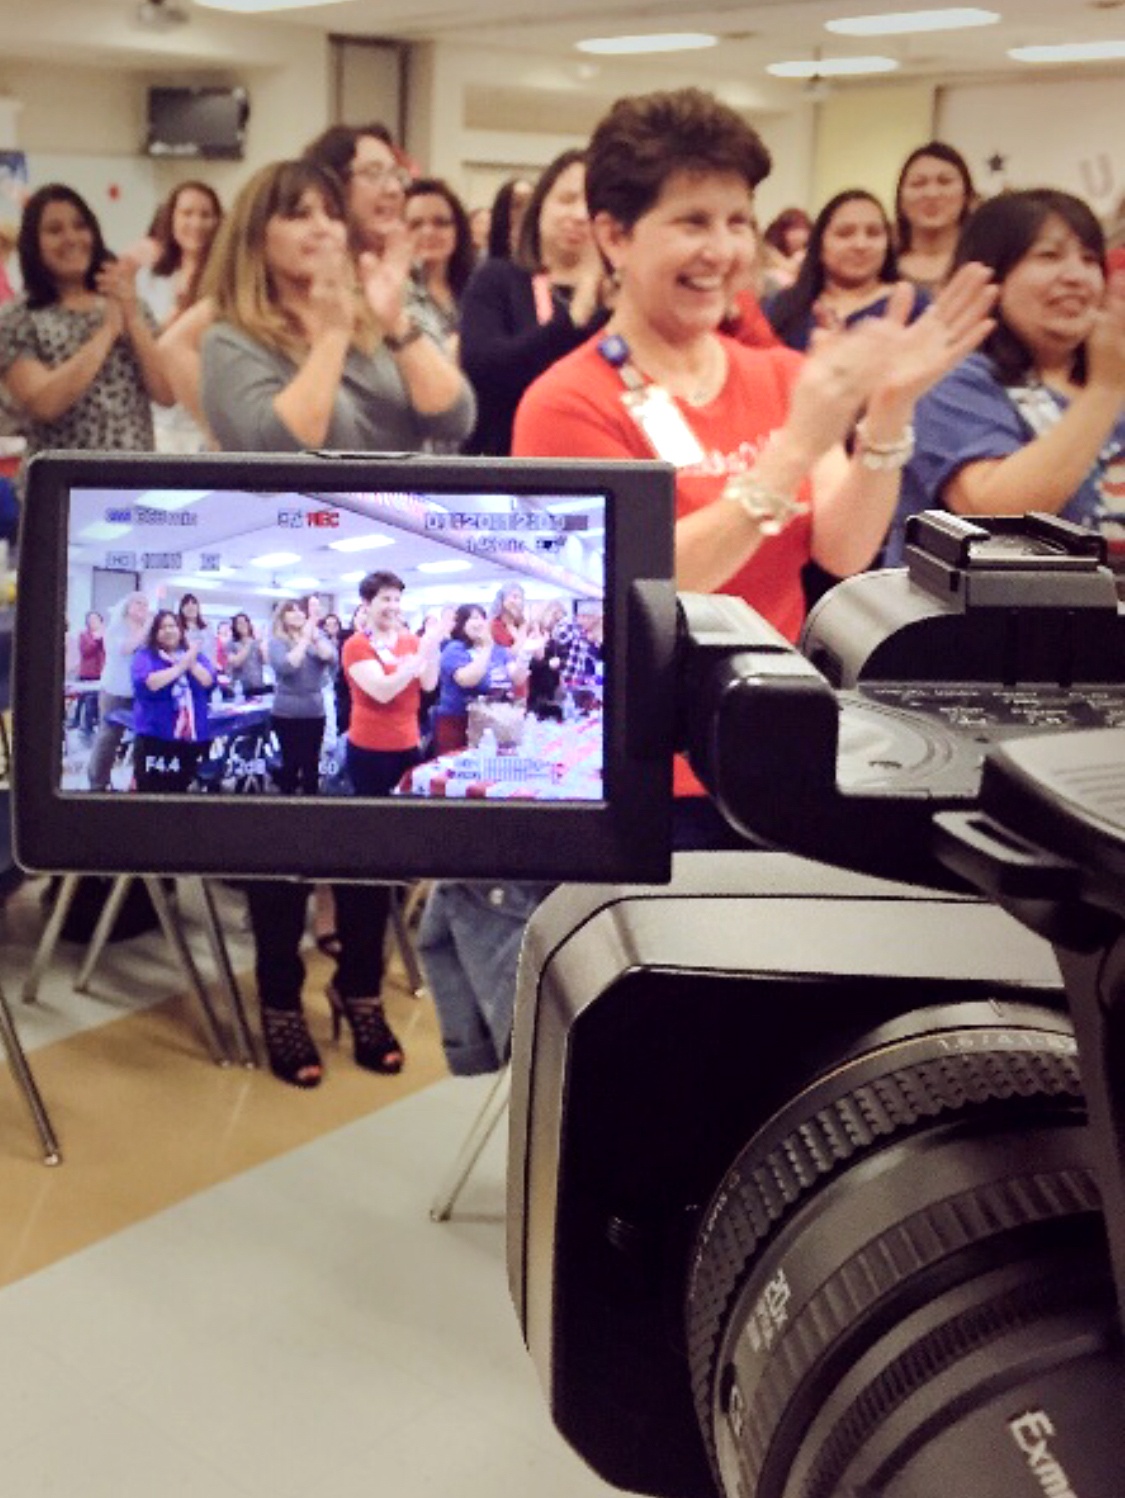 Large female audience standing and clapping with camera in foreground